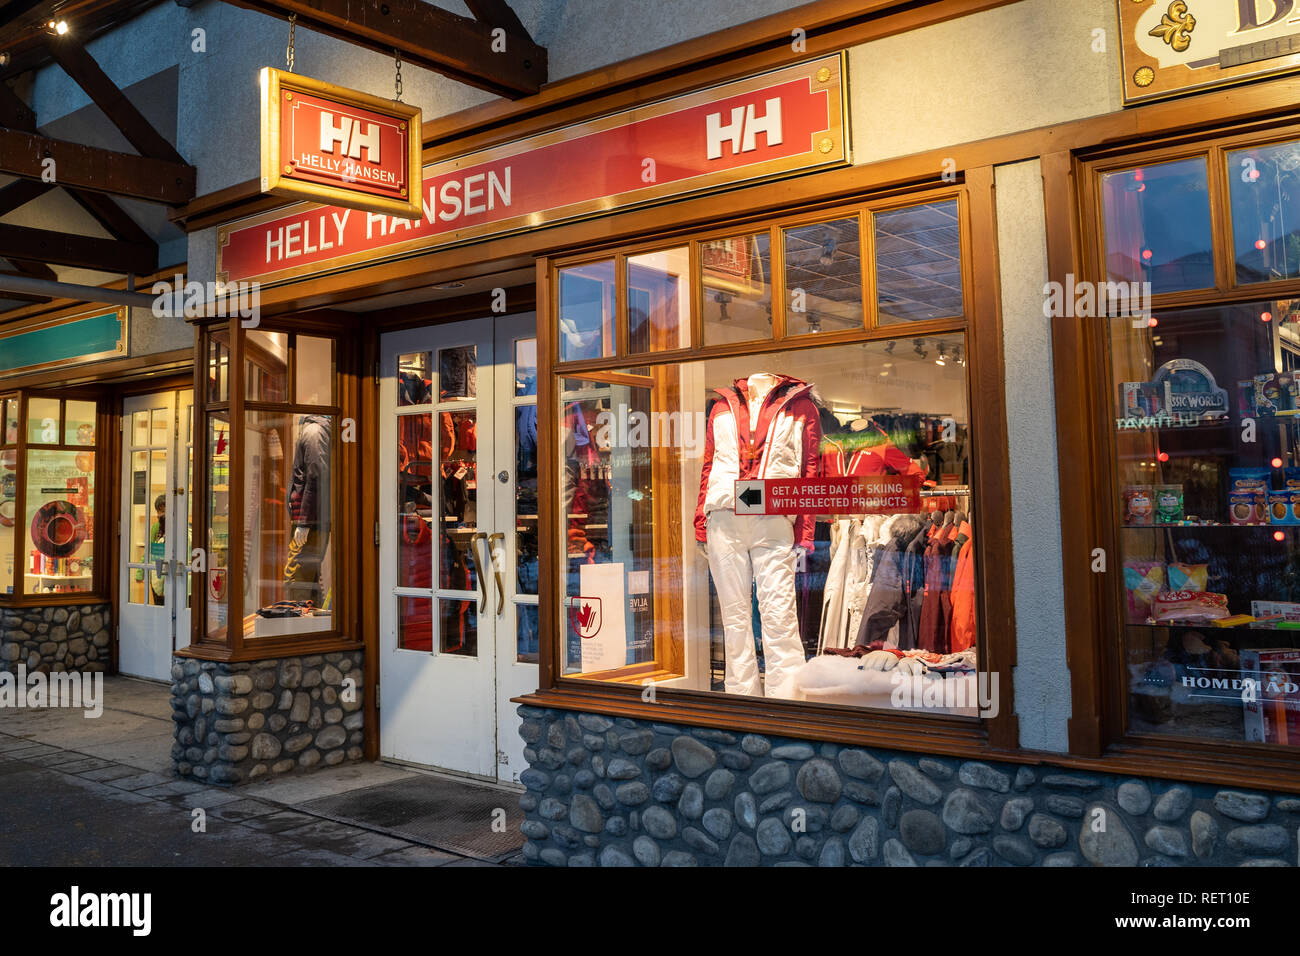 Helly Hansen High Resolution Stock Photography and Images - Alamy